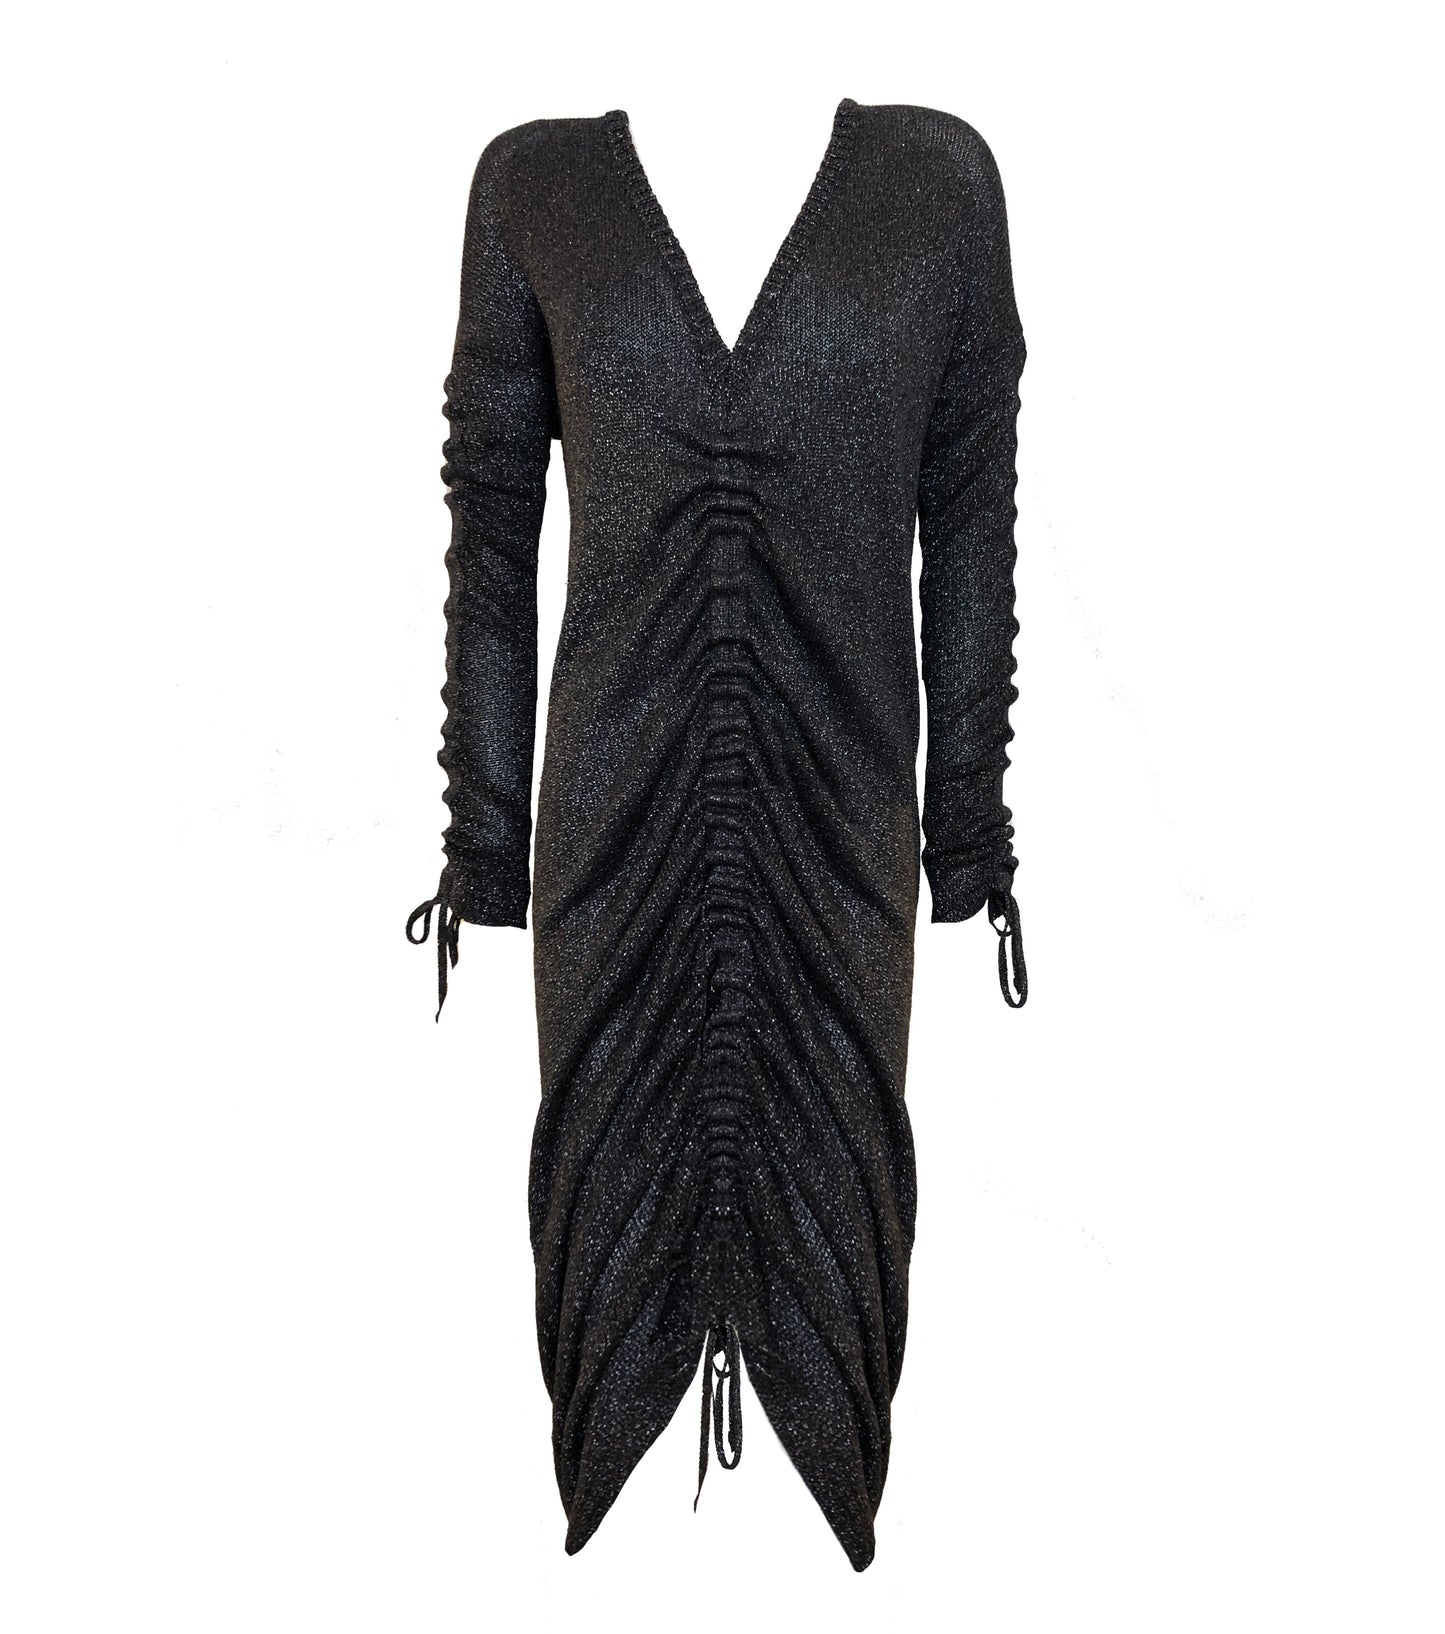 The Knitted Party Dress in Metallic Black